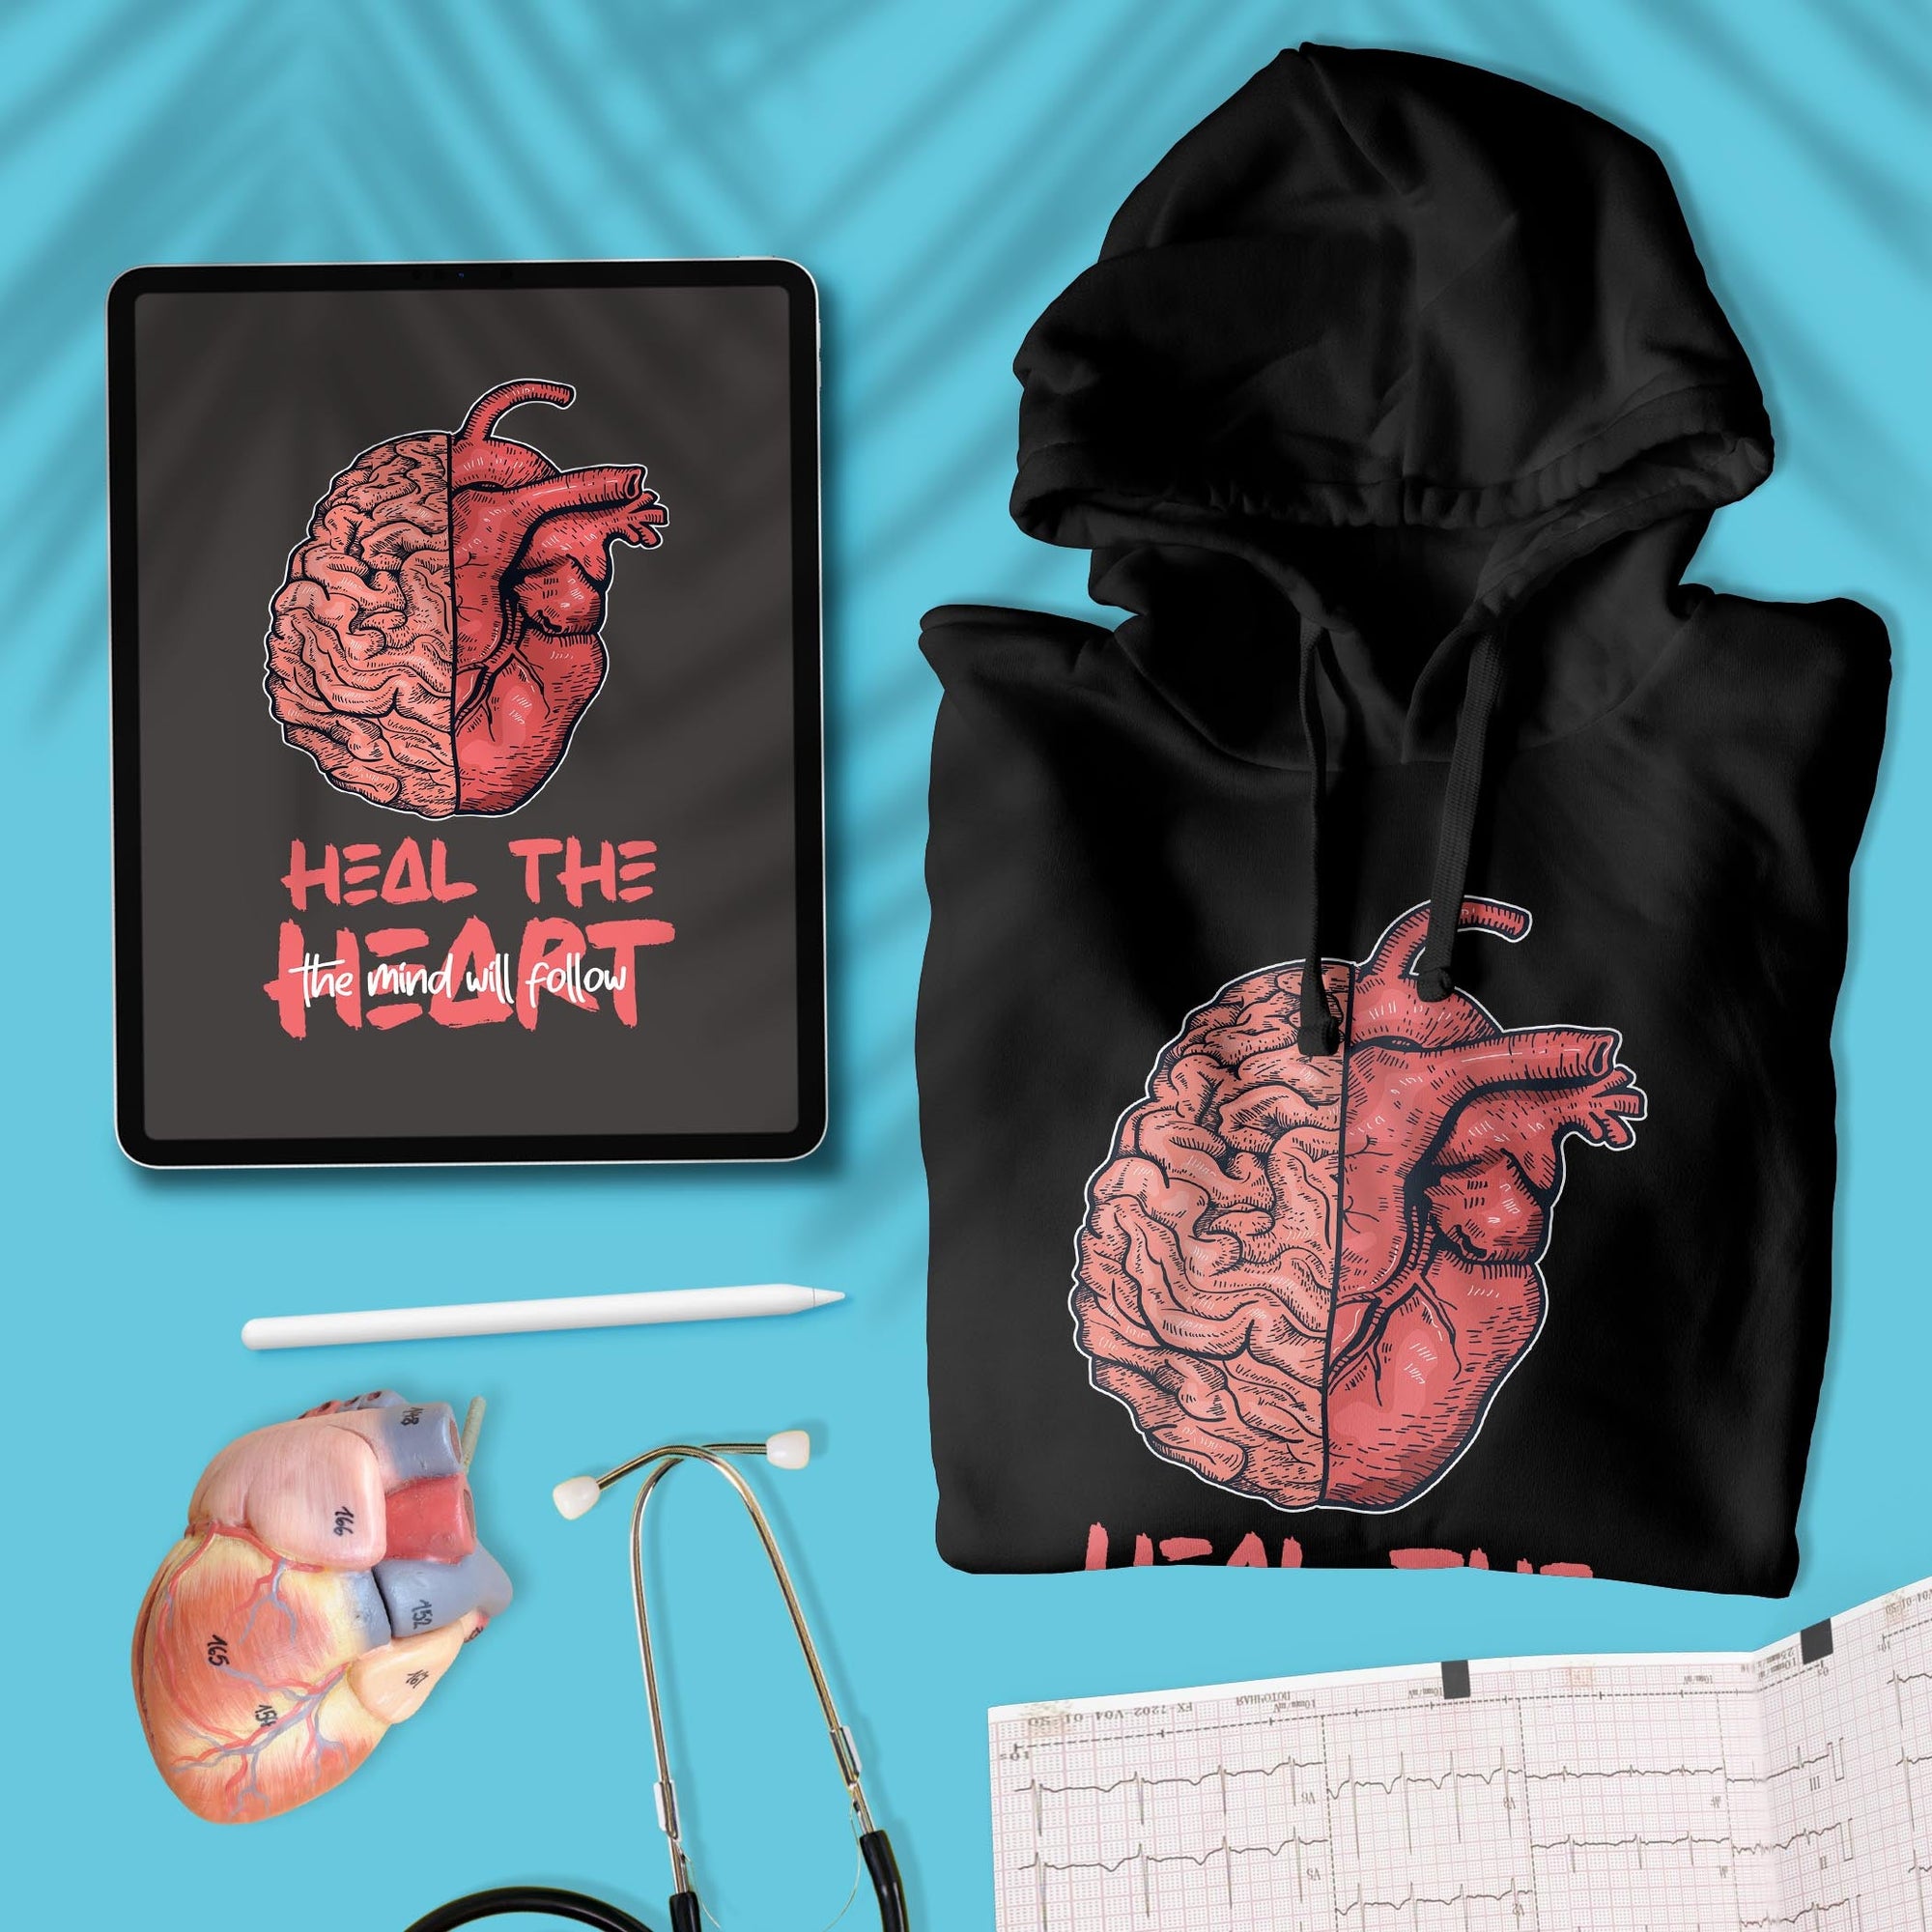 Heal The Heart, The Mind Will Follow - Unisex Hoodie